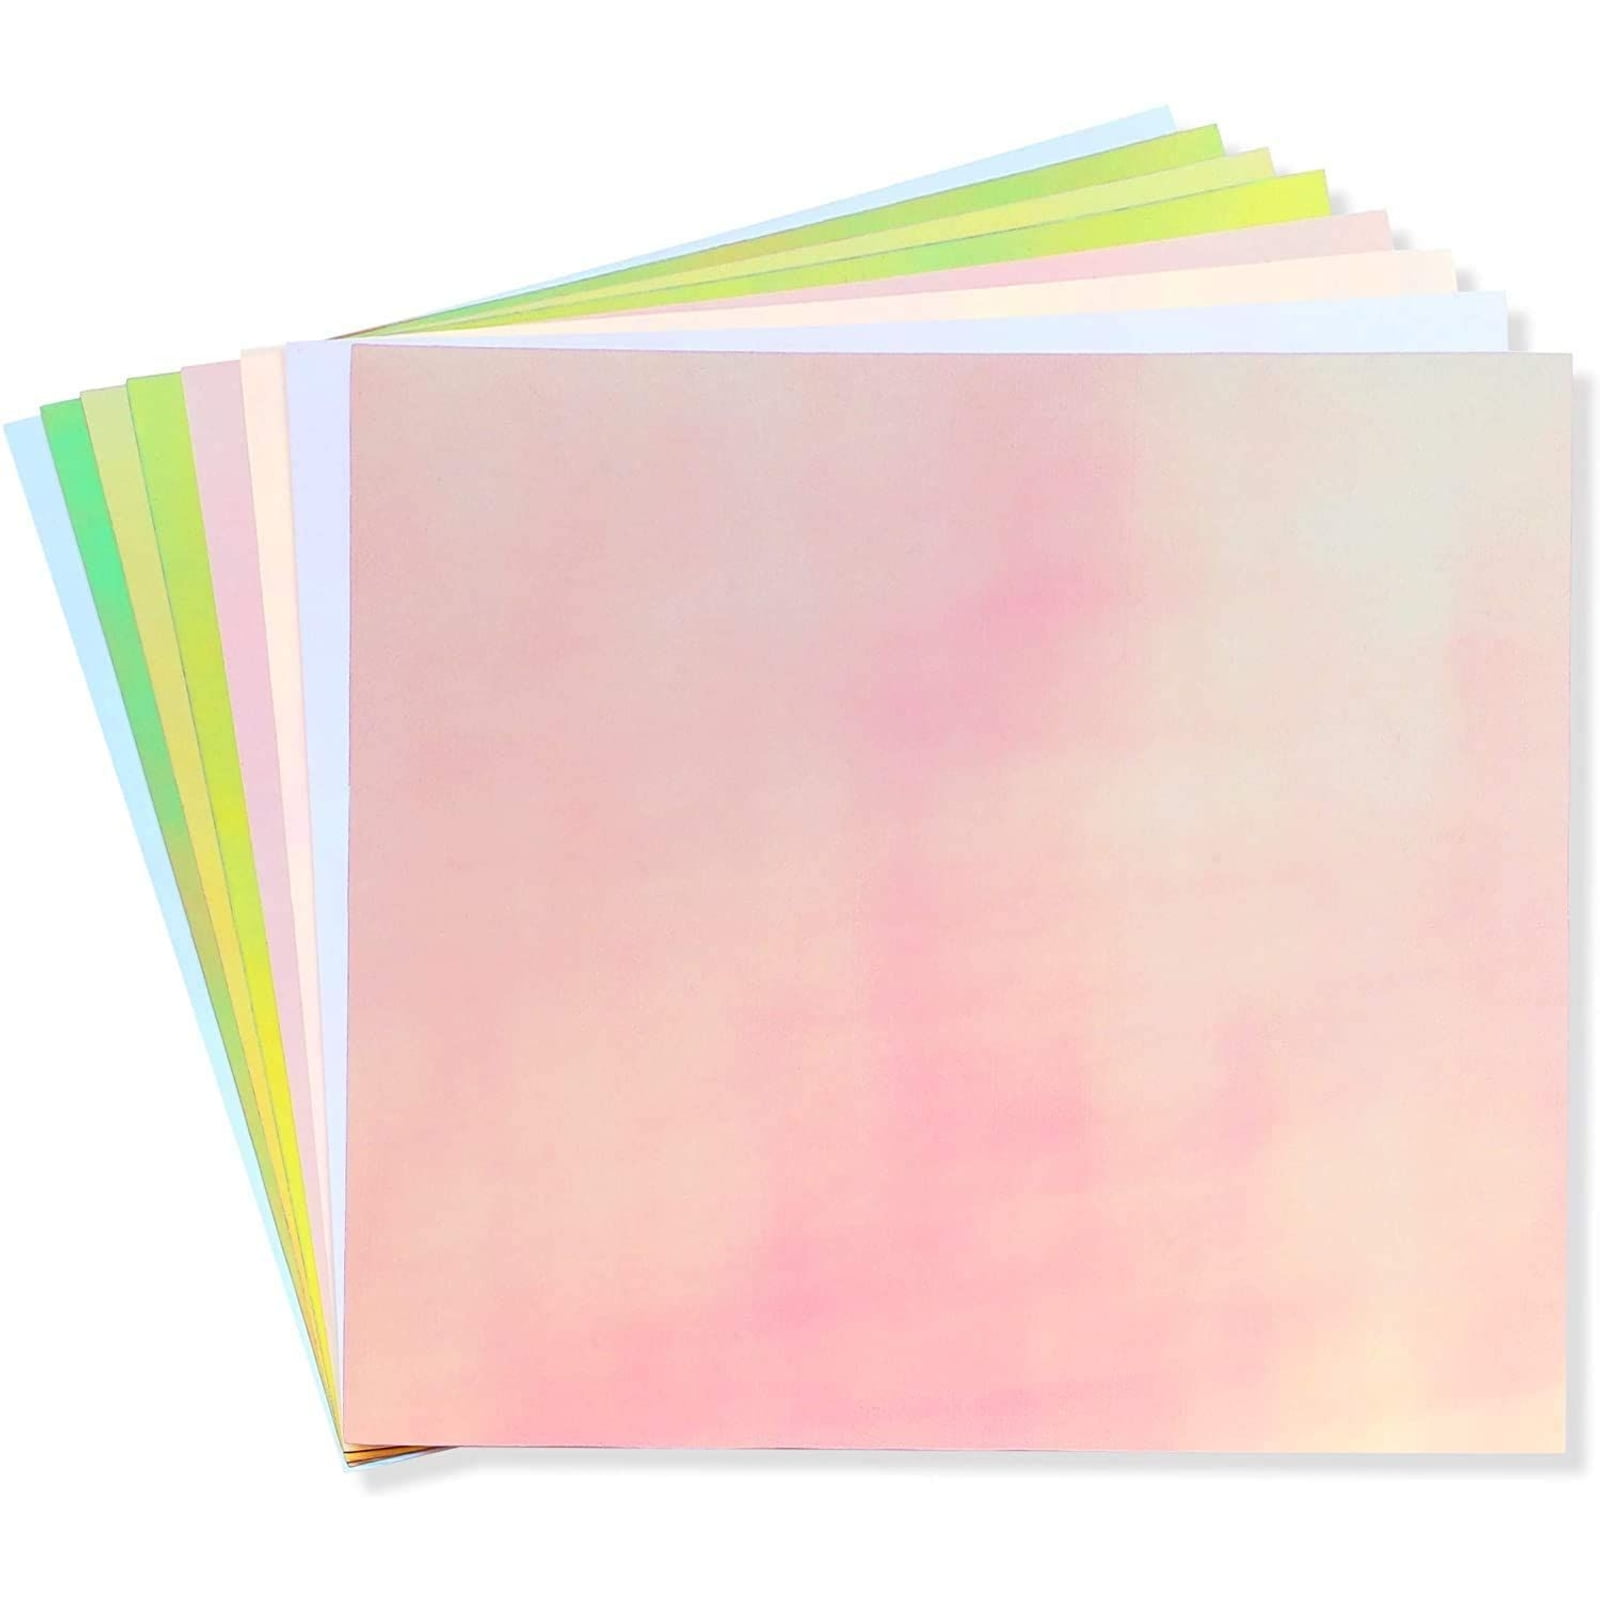 12 Sheets of A4 Premium NEON Card Assorted Colours Scrapbooking Crafts Paper 